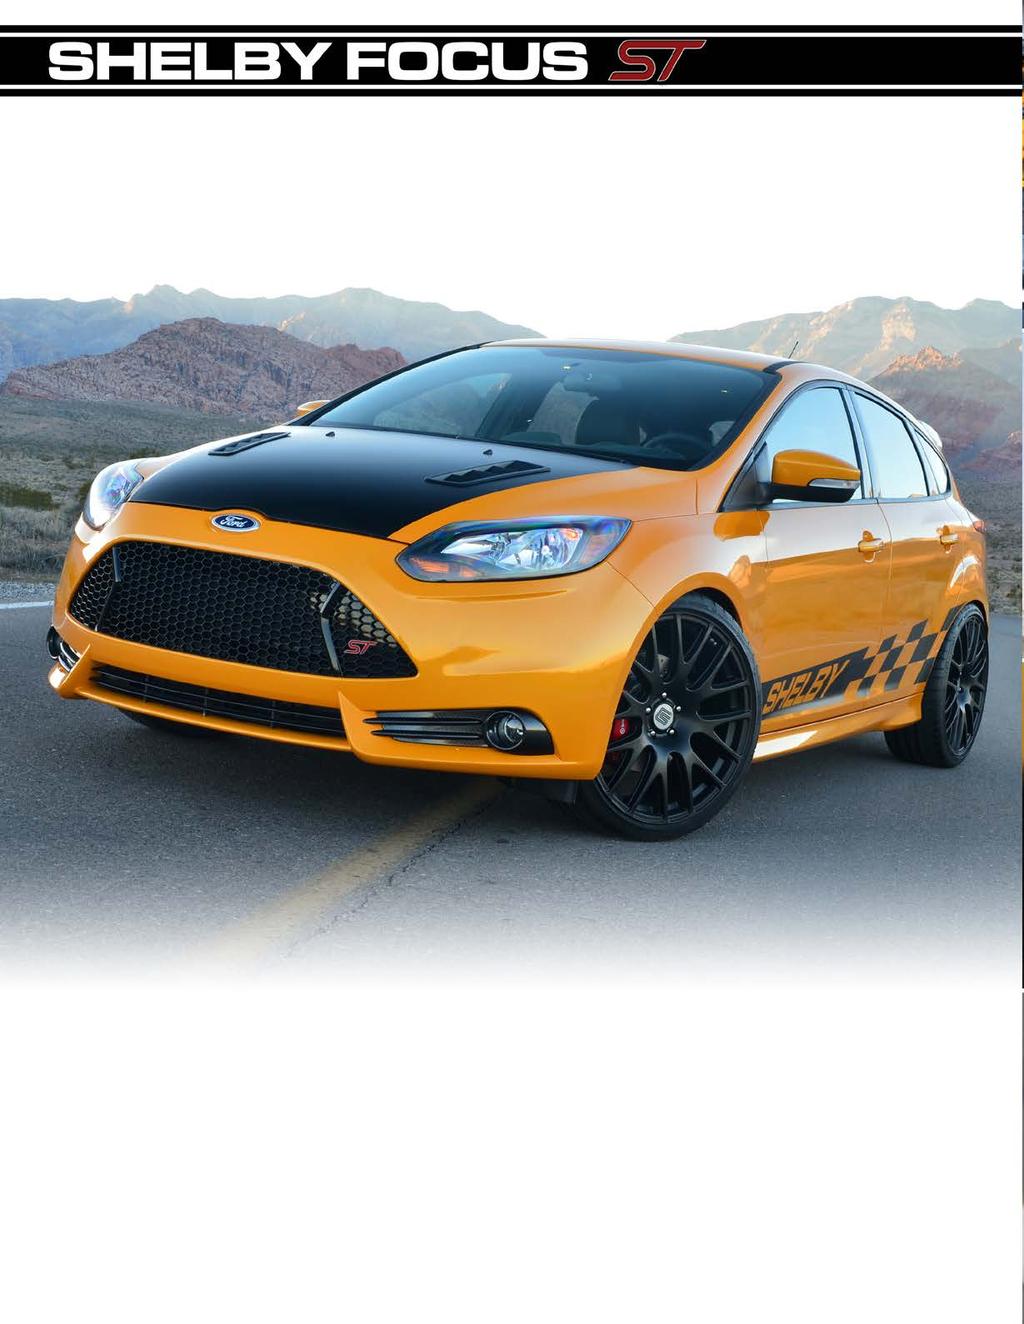 2013 Focus Concept CSM - 13SF0001C Asking Price - $50,000 This Shelby Focus features a 260HP turbocharged and intercooled 2.3 liter 4 cyl engine.